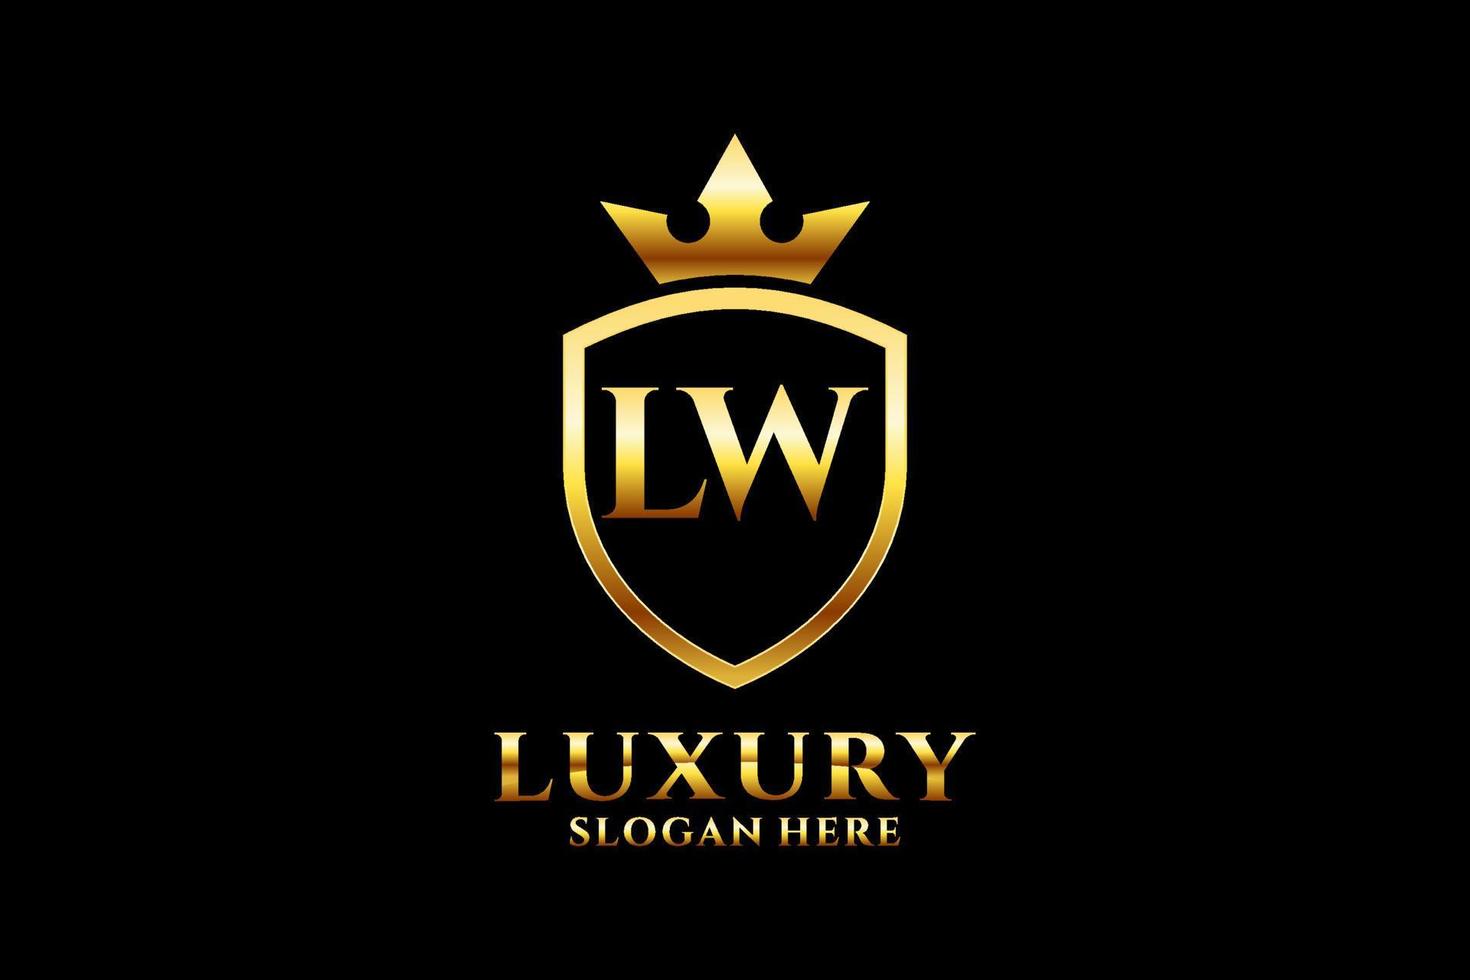 initial LW elegant luxury monogram logo or badge template with scrolls and royal crown - perfect for luxurious branding projects vector